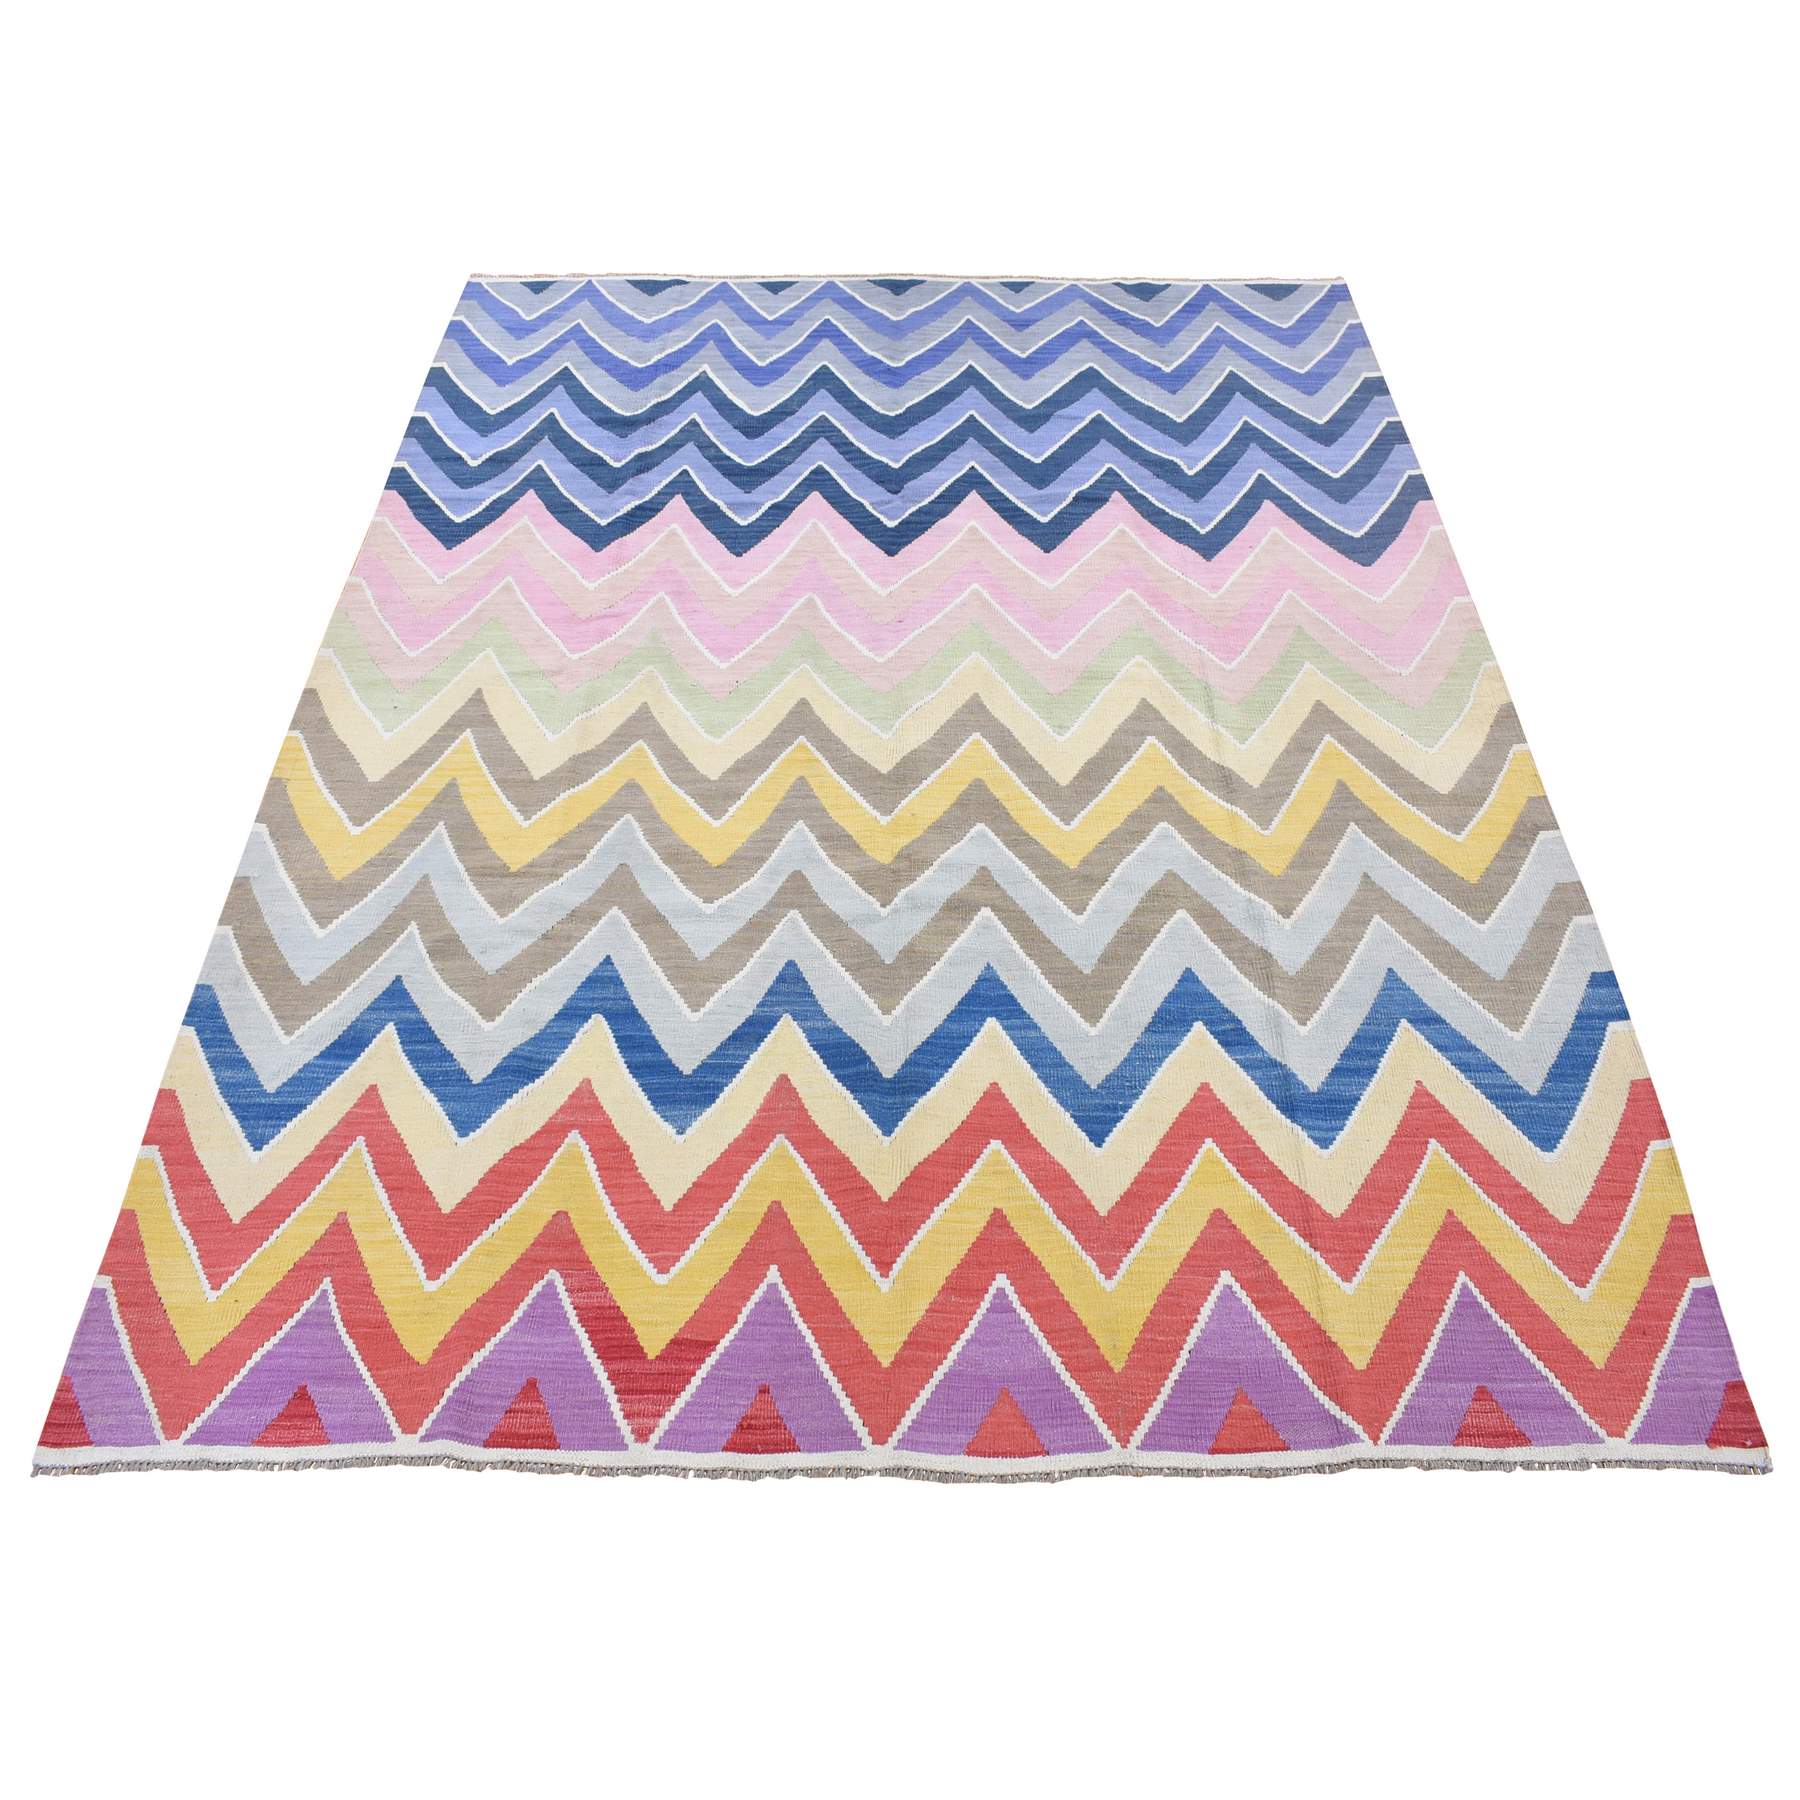 Colorful, Afghan Kilim Chevron Design, Flat Weave Vegetable Dyes, Soft Wool Hand Woven, Reversible Oriental 